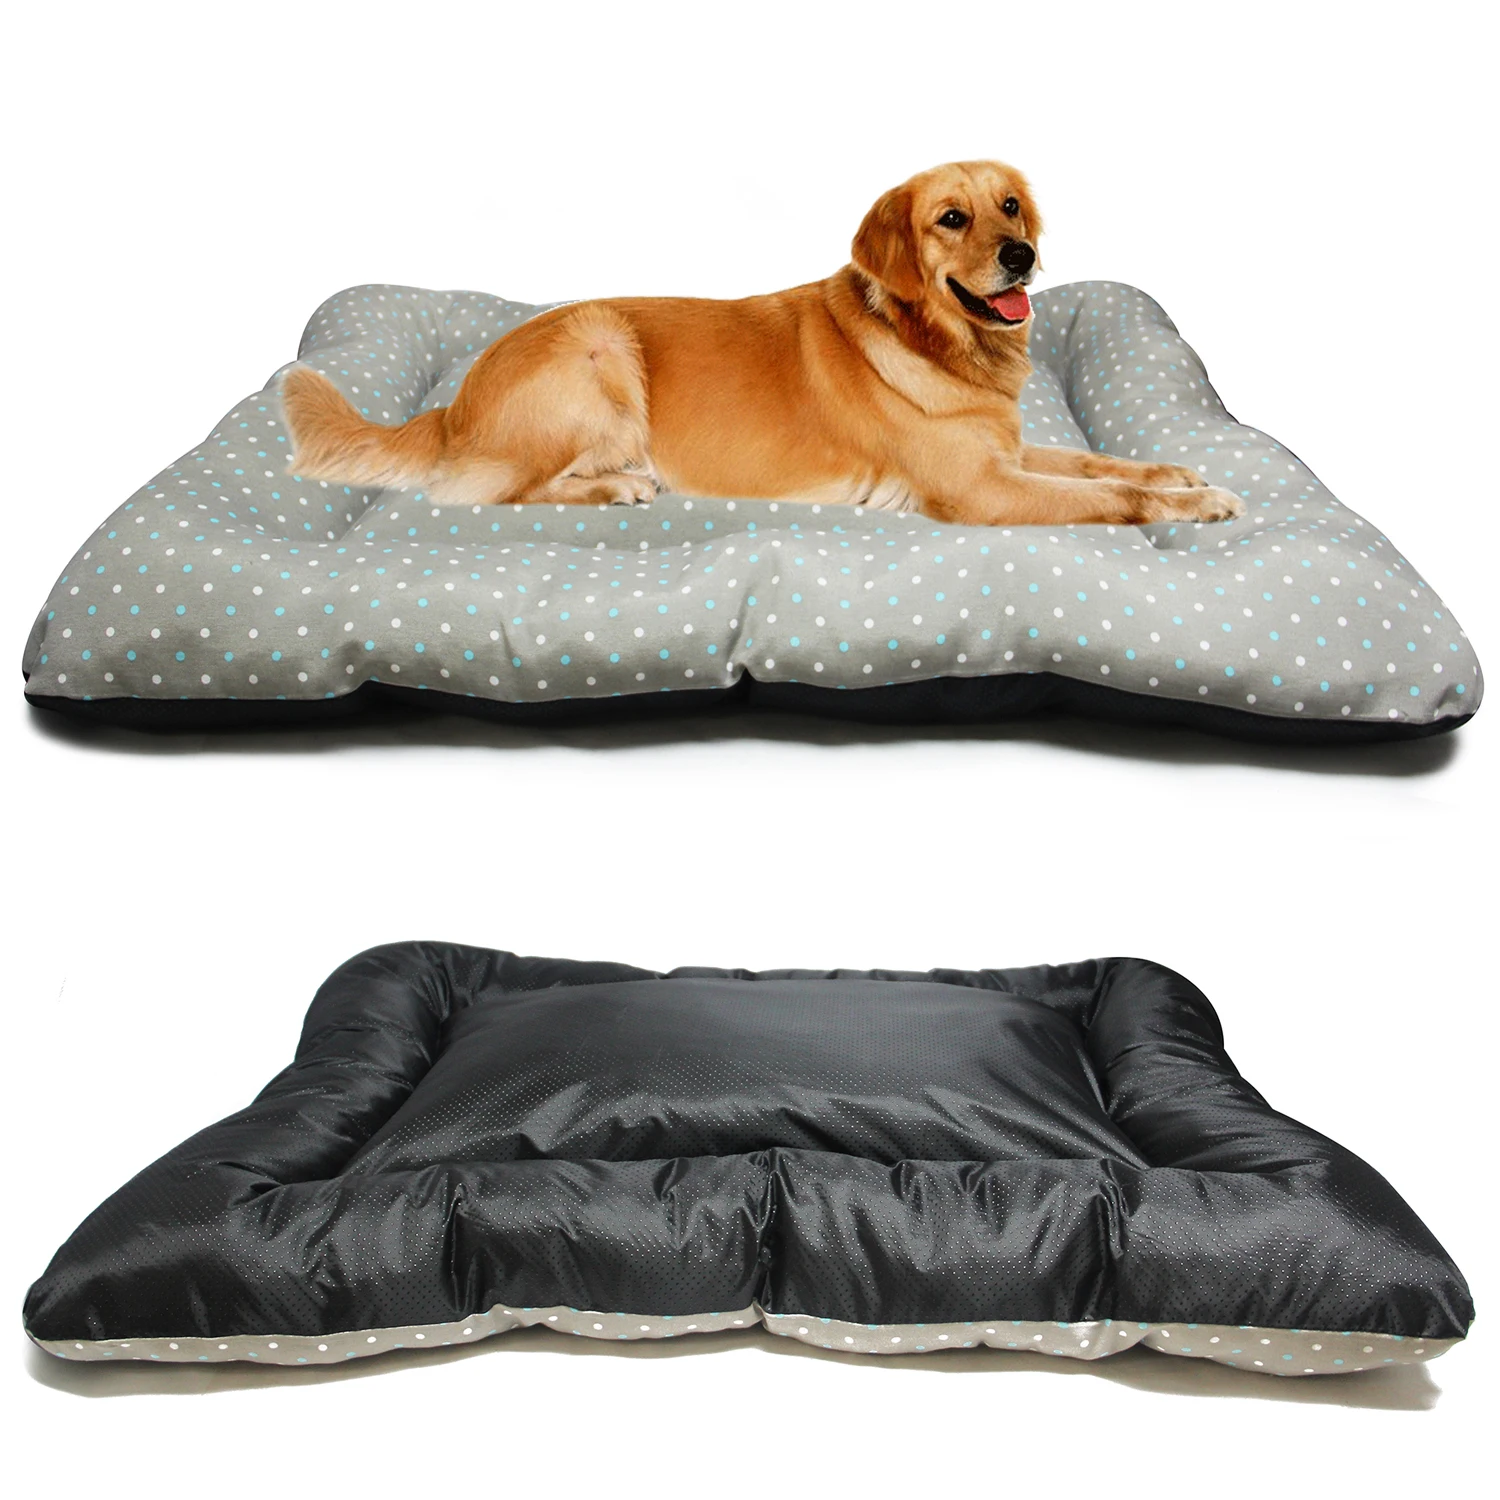 BPS BPS-14094PE Blanket for Dogs Cats Bed Pets Non-Slip Size S/M/L Portable Mattress Sofa Pillow S: 80 x 60 cm, Dogs